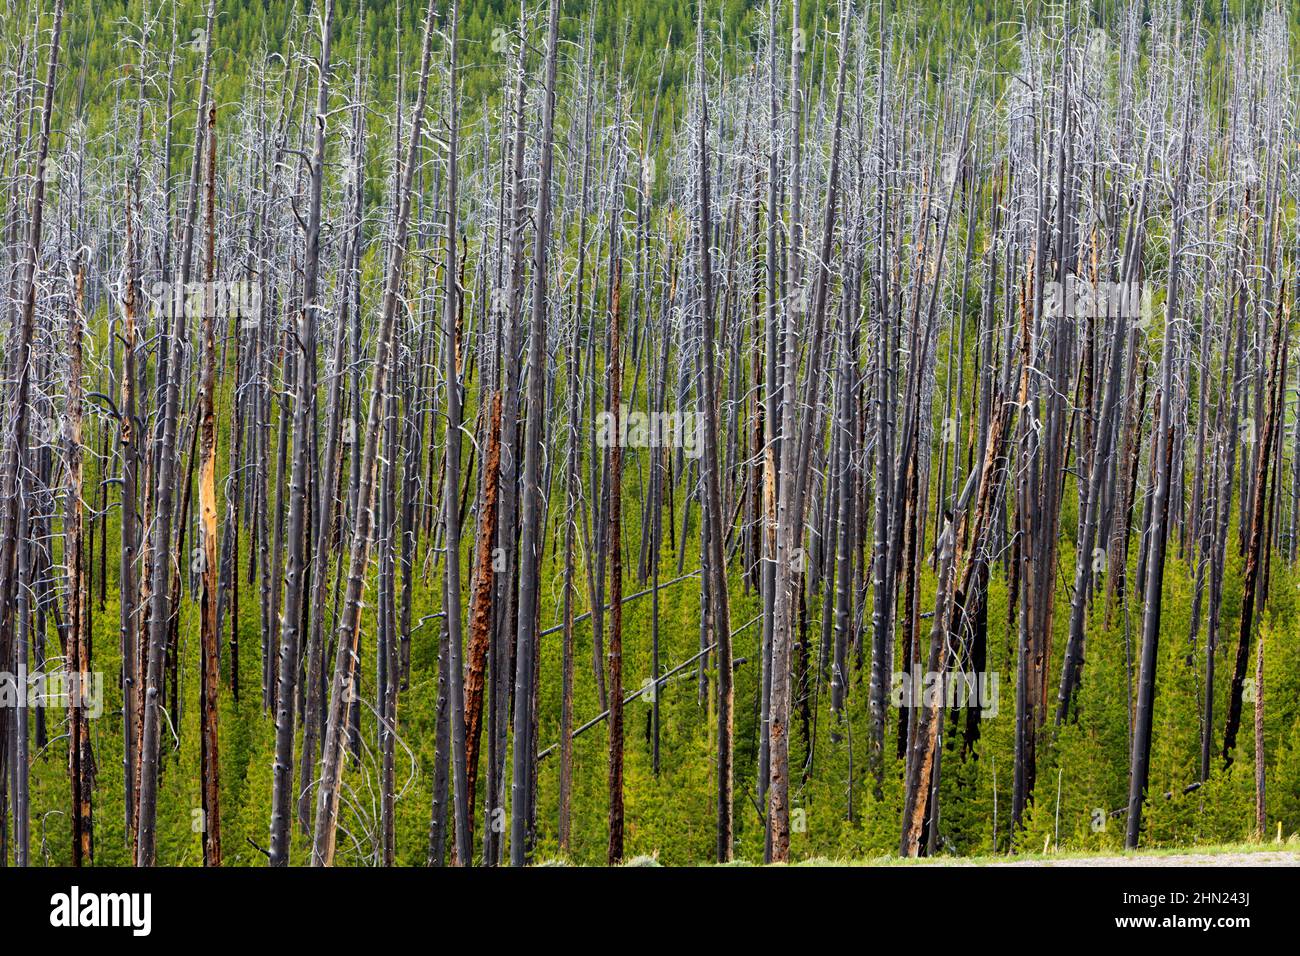 Lodgepole Pine (Pinus contorta) regeneration after fire, Dunraven Pass, Yellowstone NP, Wyoming Stock Photo